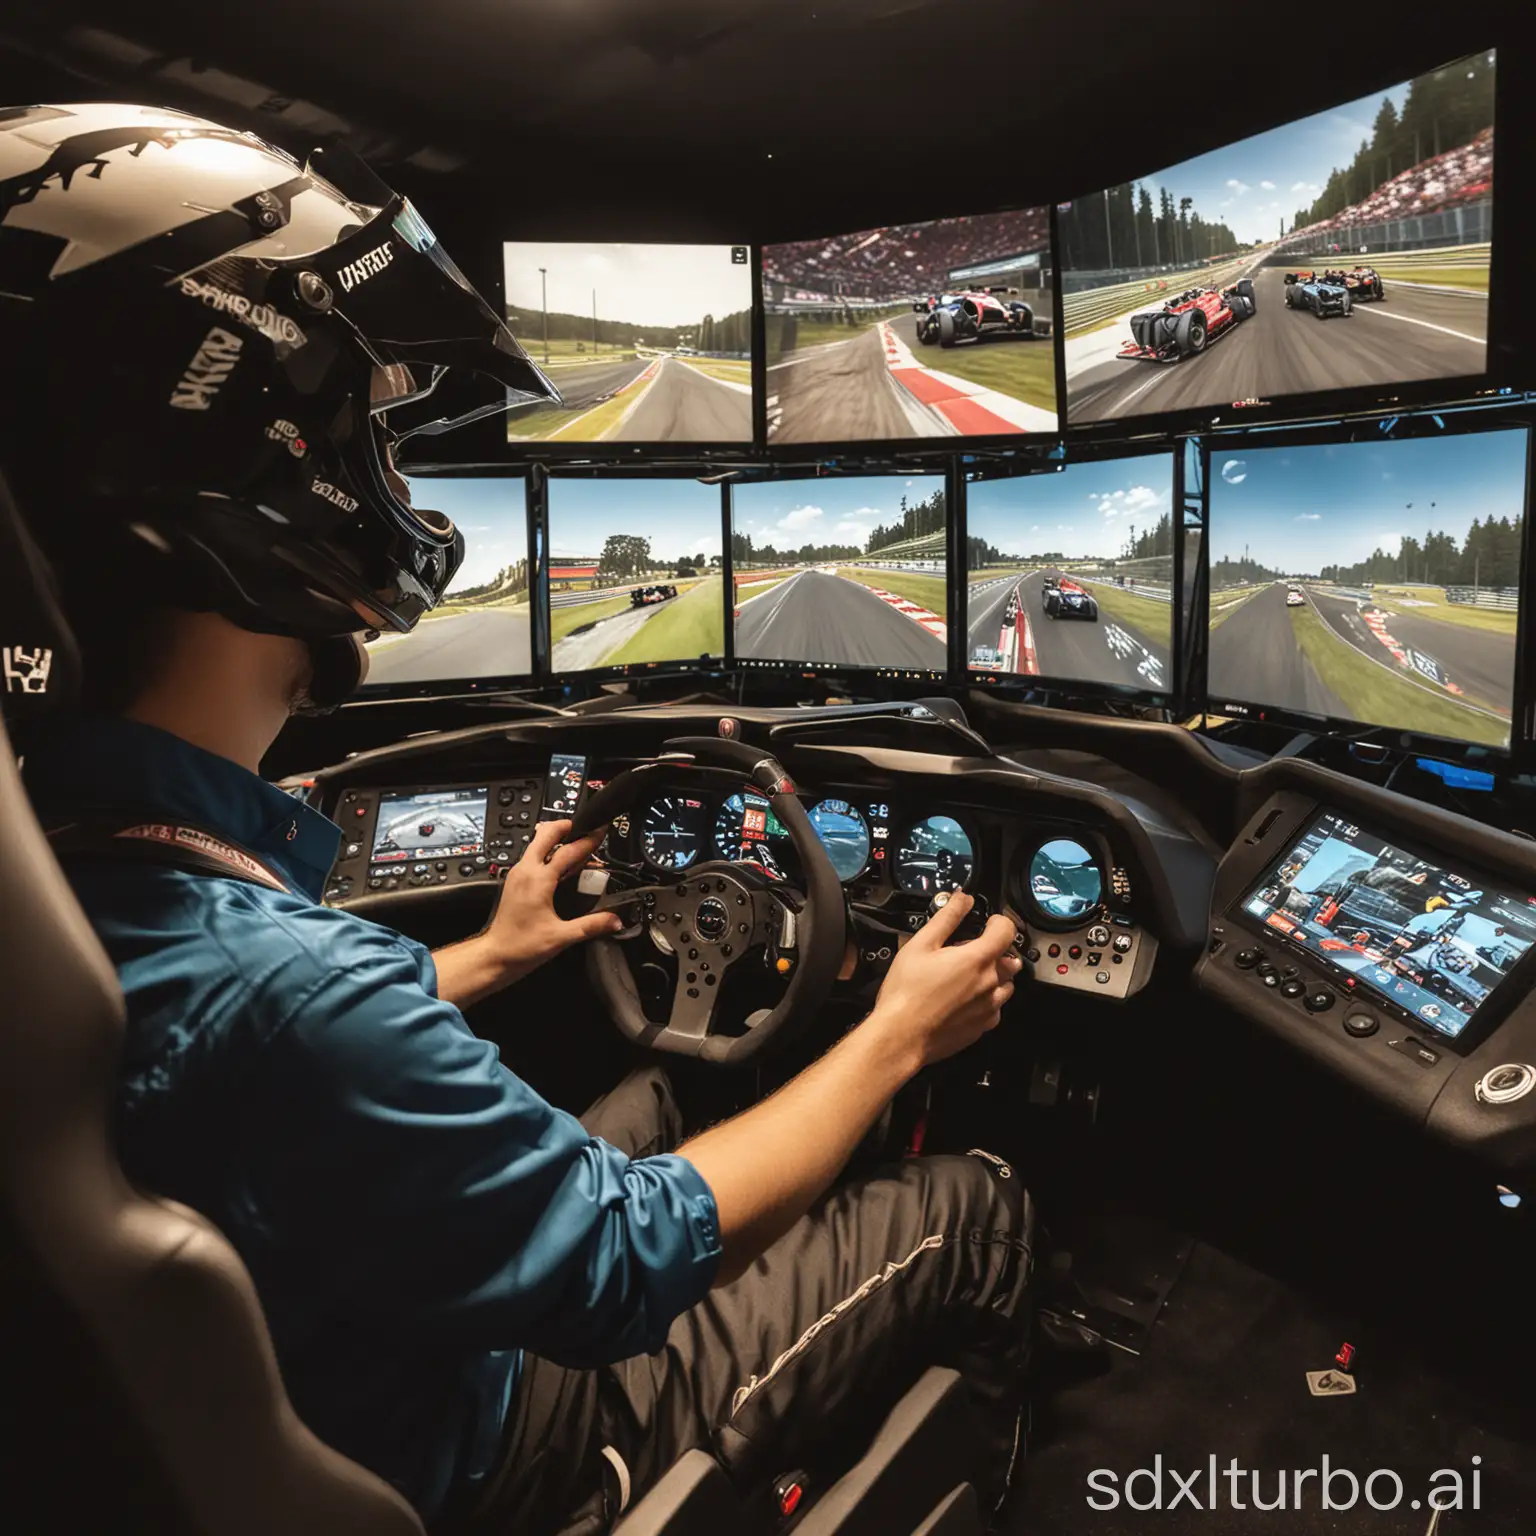 A person wearing a racing suit and helmet is sitting in a racing simulator cockpit. They are holding an Ascher Racing SIM Wheel in their hands and are looking at the track ahead of them. The simulator is surrounded by screens that are displaying the track and the other cars.